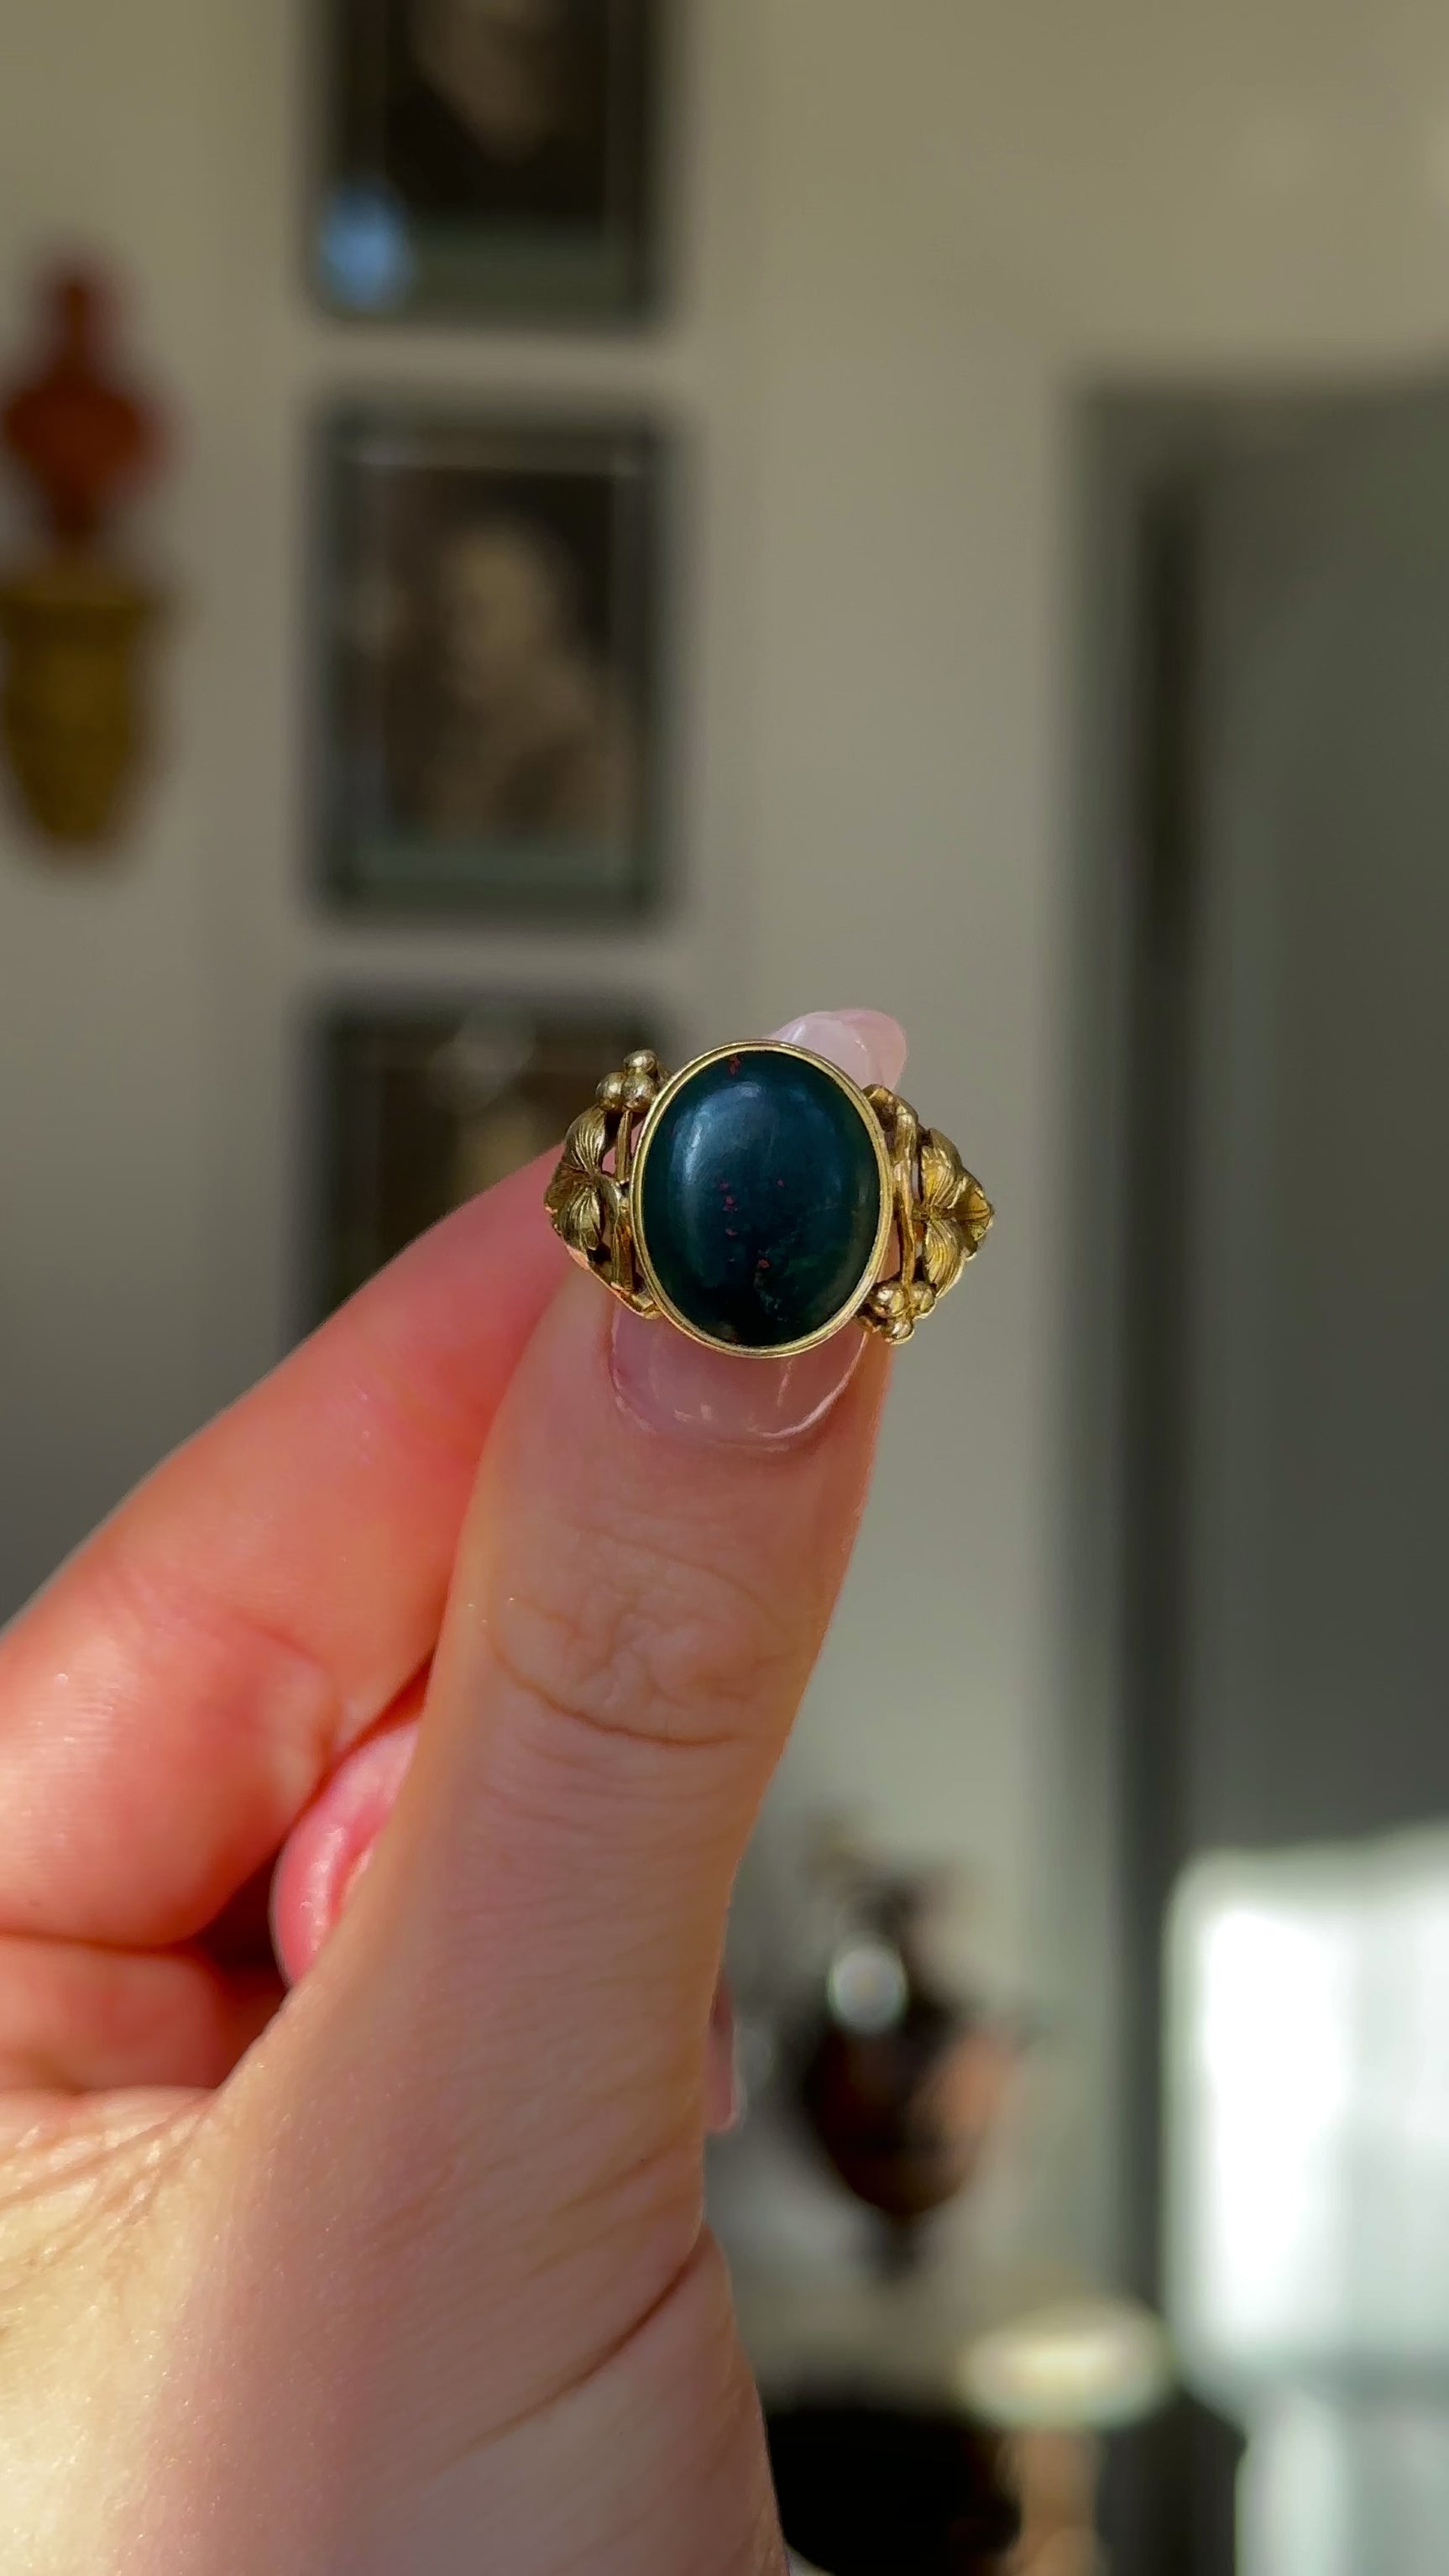 Antique, Victorian Bloodstone Signet Ring, 18ct Yellow Gold held in fingers and rotated to give perspective.